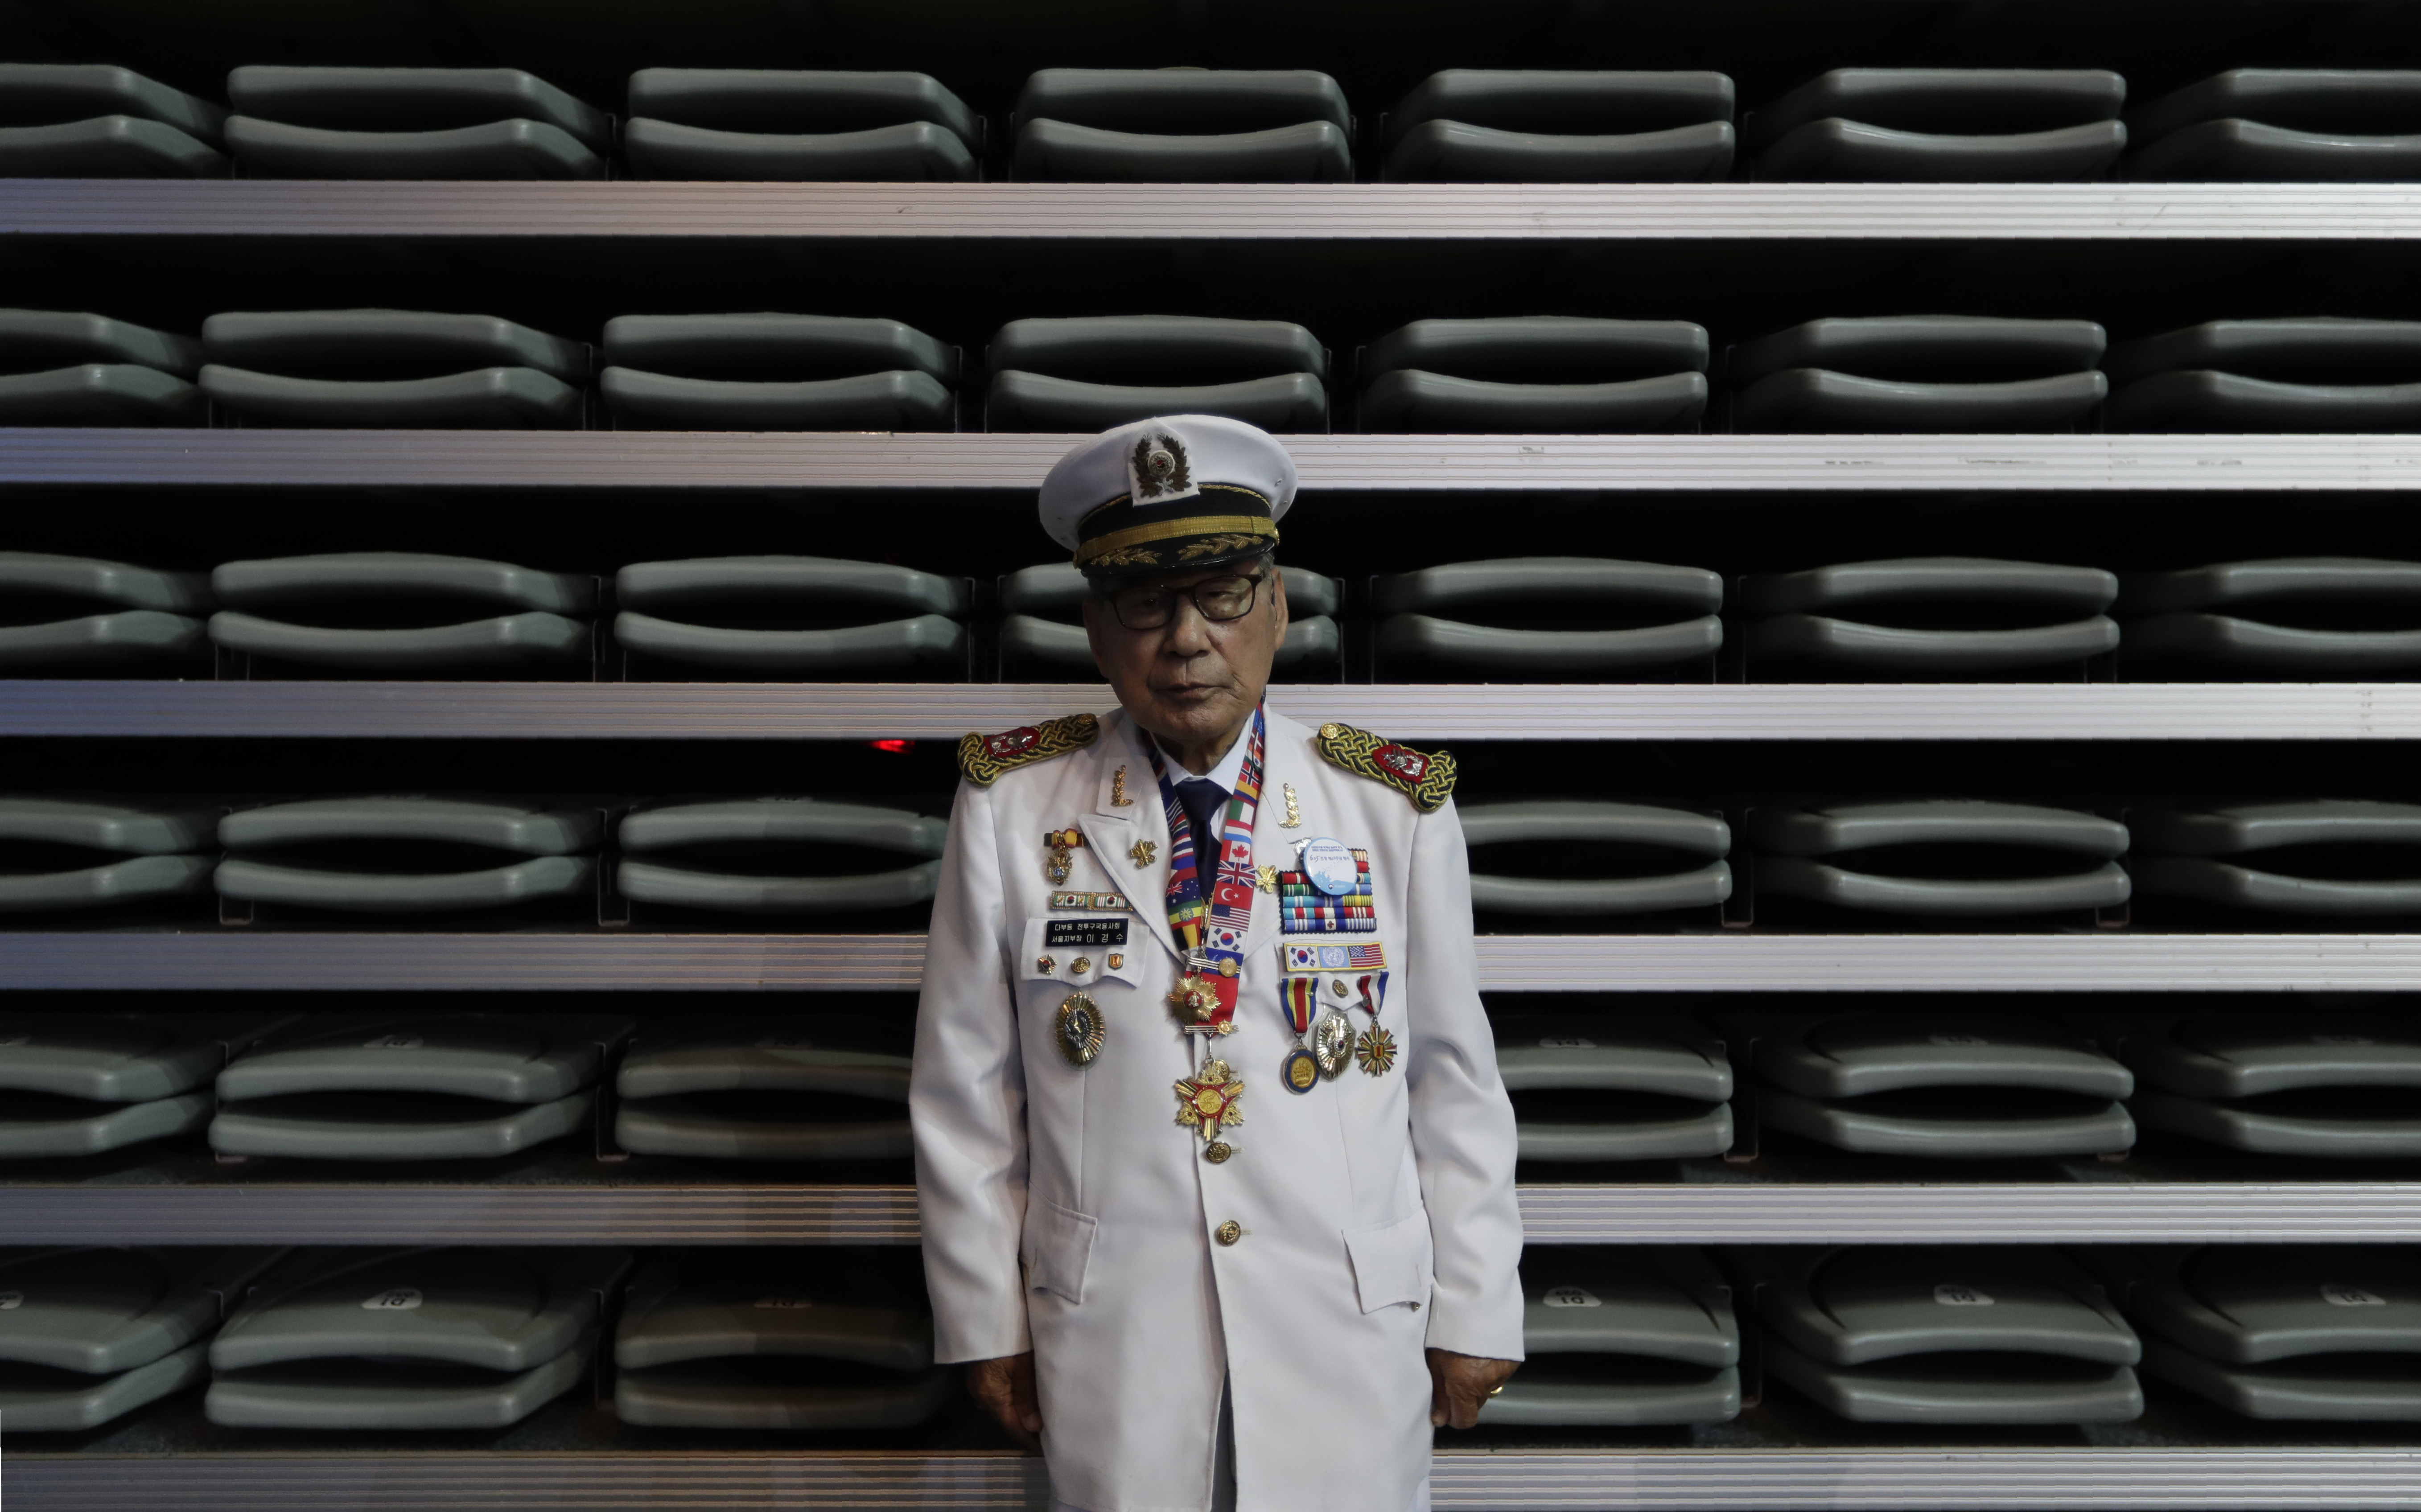 A South Korean war veteran Lee Kyung-su, 90, who fought at Dabudong battle during the Korean War, poses for a photo before a ceremony to mark the 69th anniversary of the outbreak of the Korean War in Seoul, South Korea, Tuesday, June 25, 2019. South Korea and North Korea fought a devastating three-year war in the early 1950s that ended with an armistice, not a peace treaty. (AP Photo/Lee Jin-man)